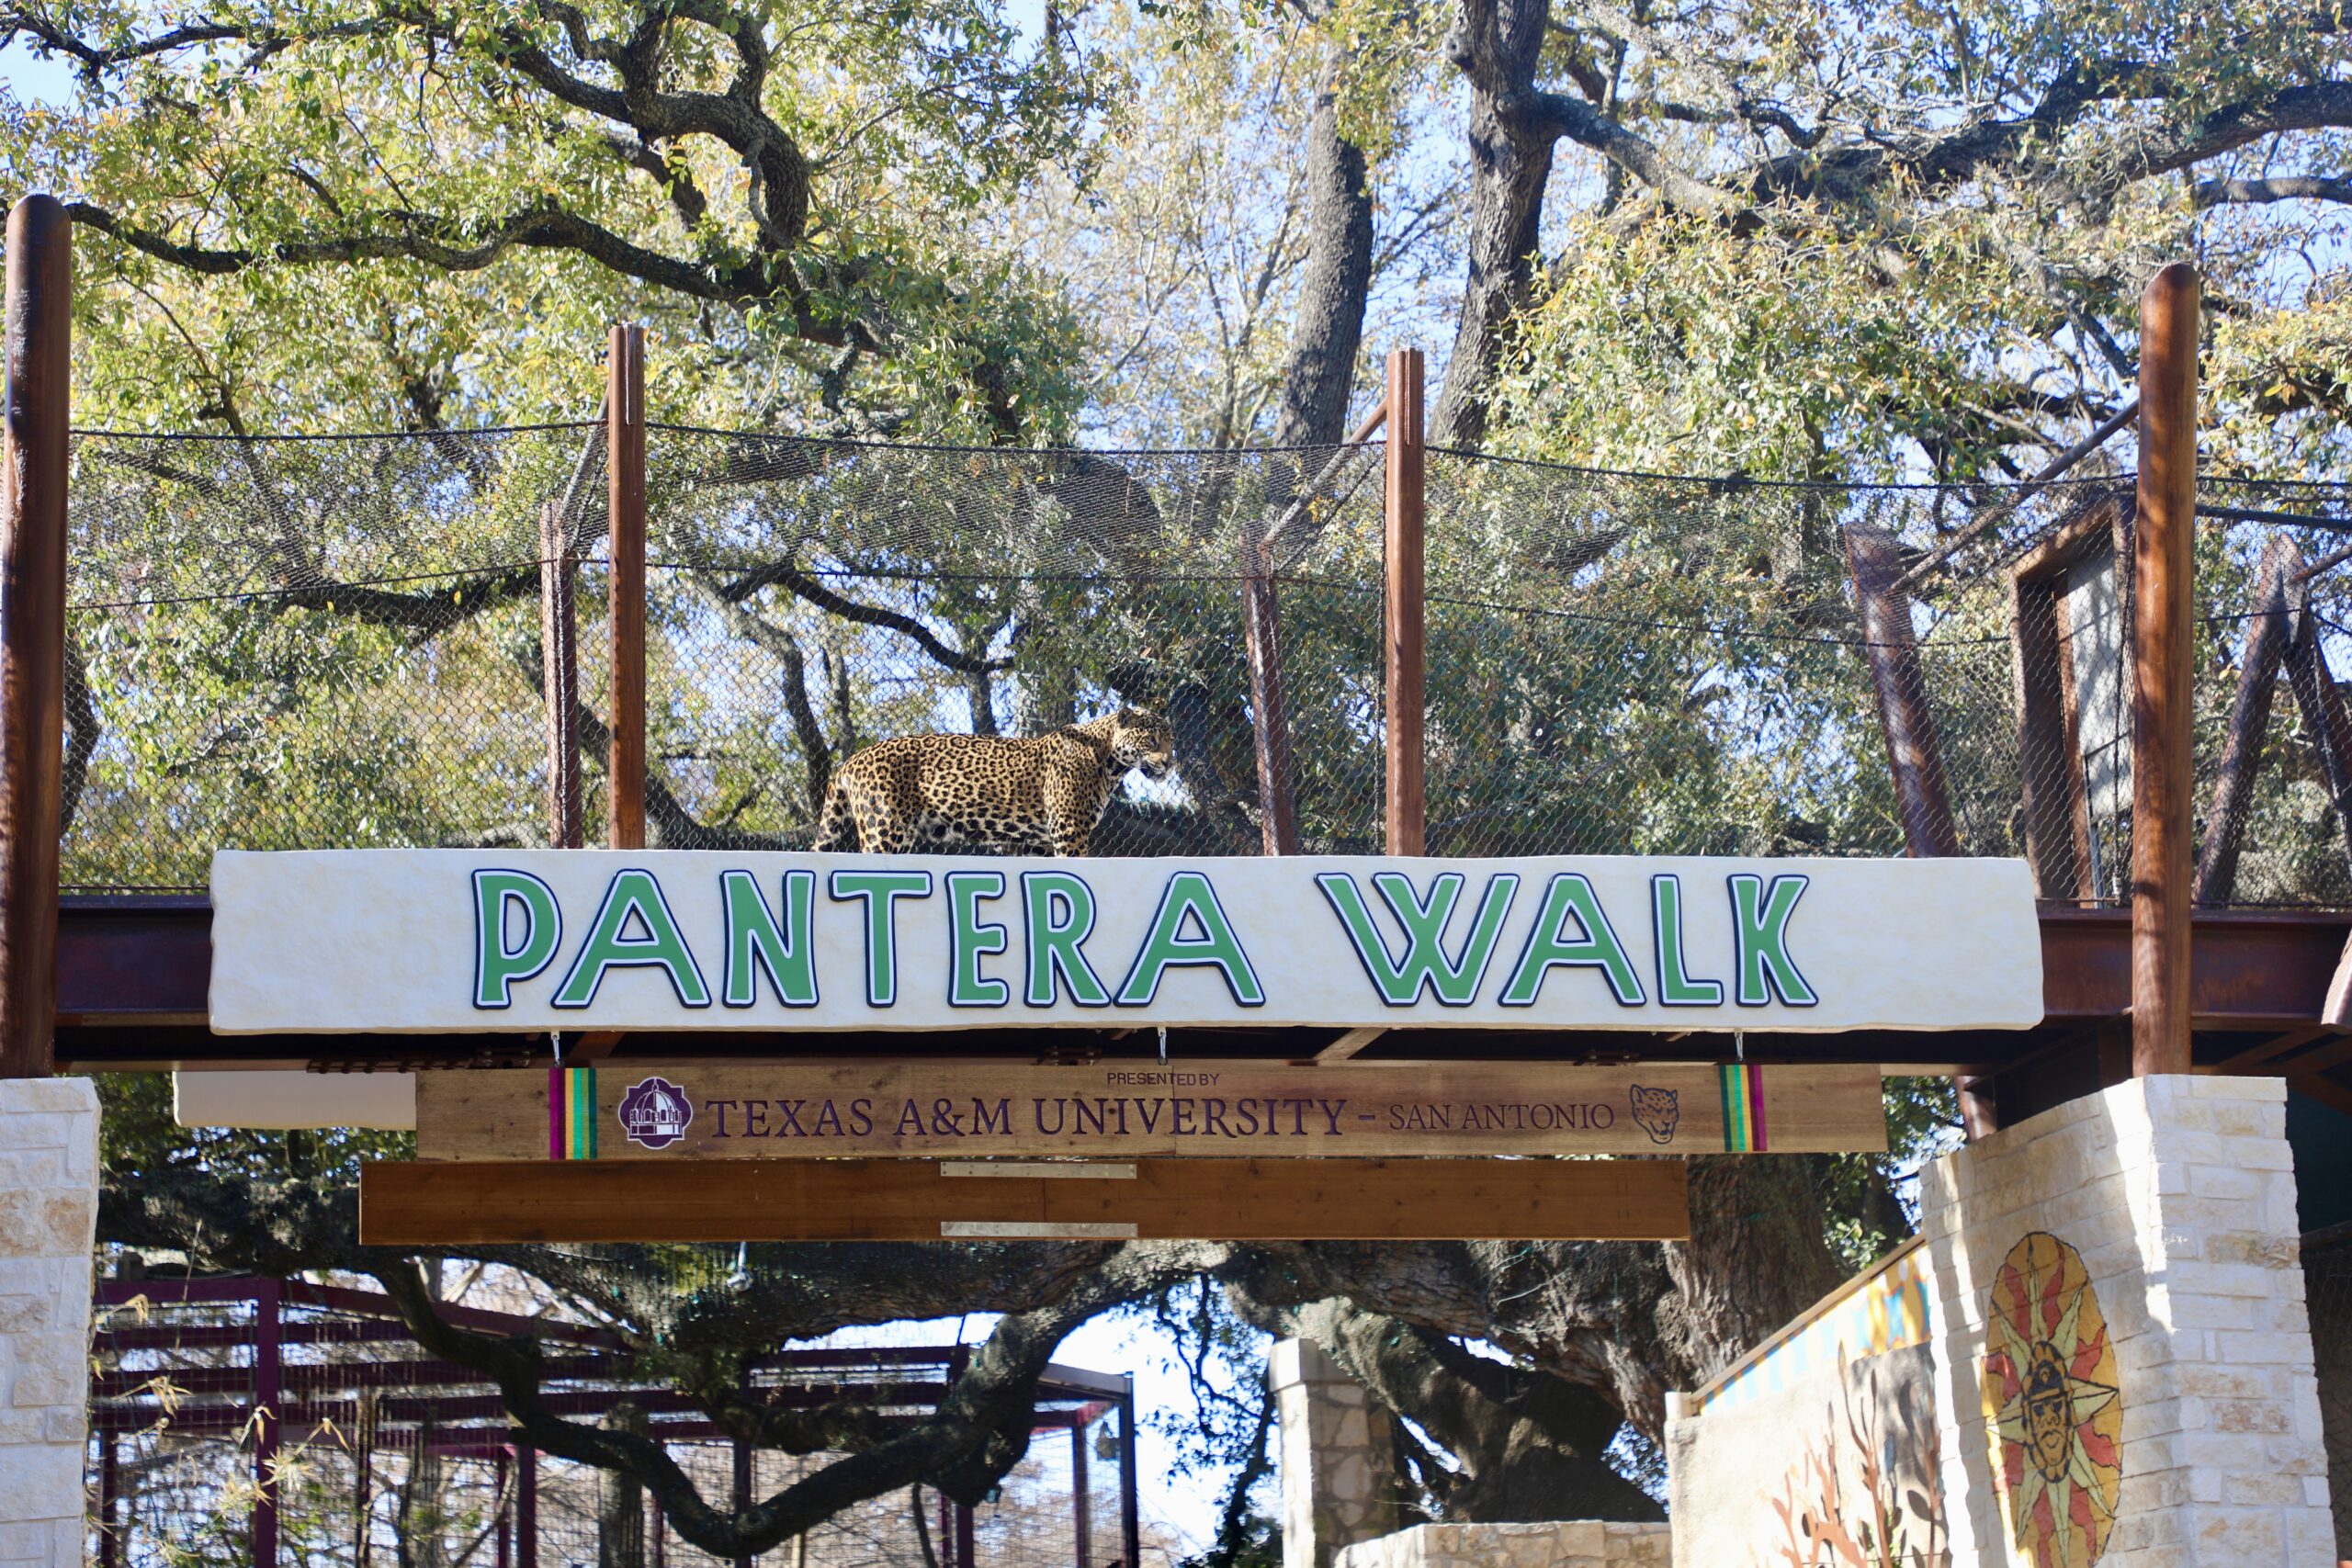 The Pantera Walk exhibit at the zoo. This elevated trail allows the zoo's jaguars to roam freely between two habitats.